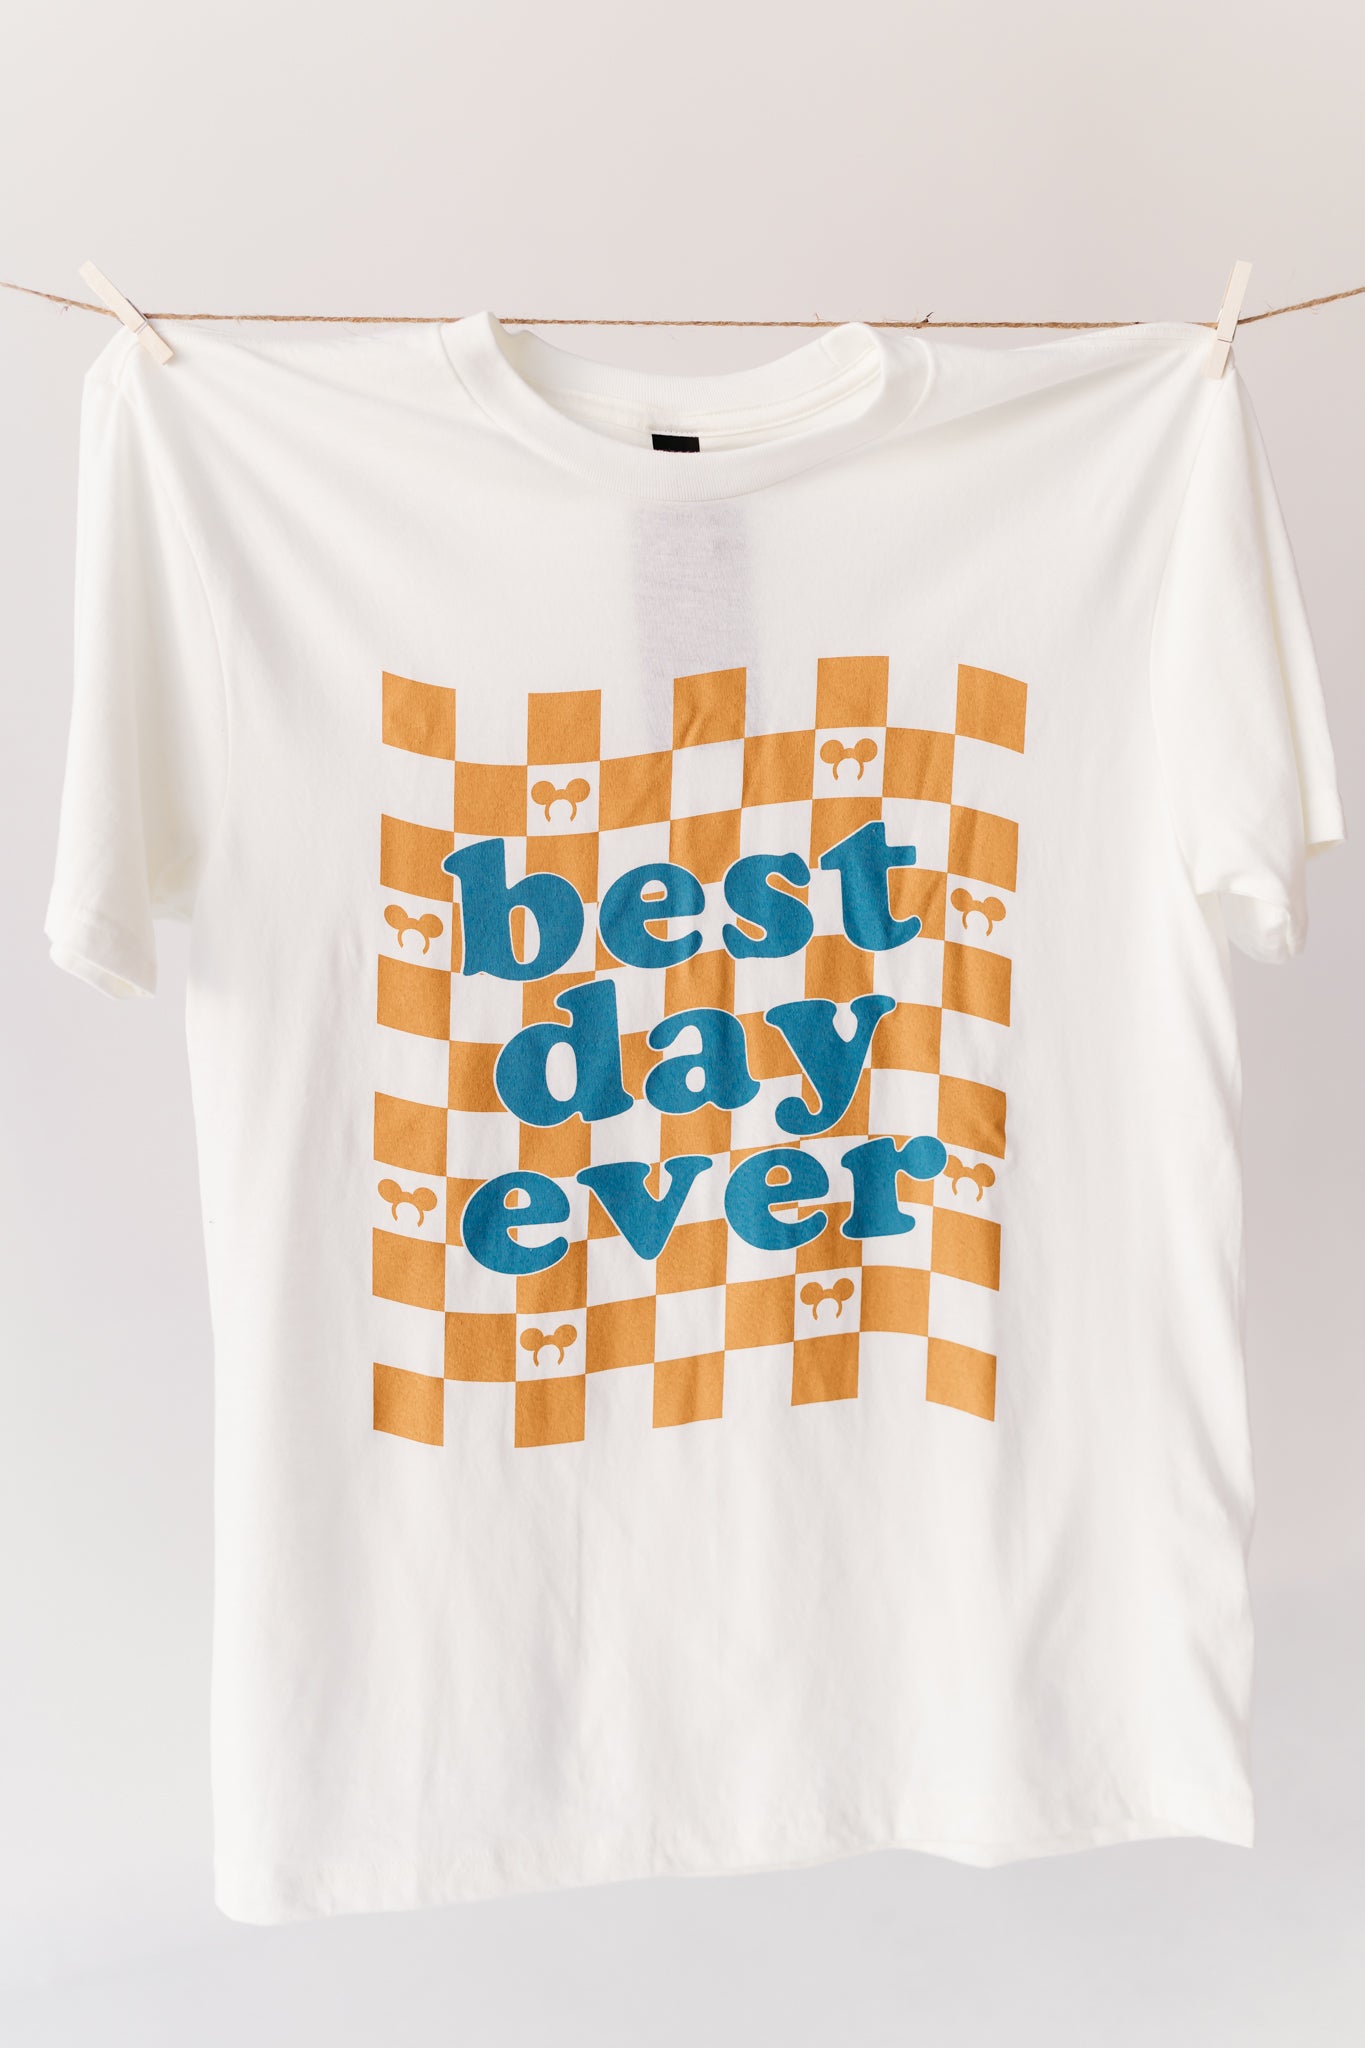 THE BEST DAY EVER ADULT TEE IN NATURAL BY HAPPY THREADS X PINK DESERT